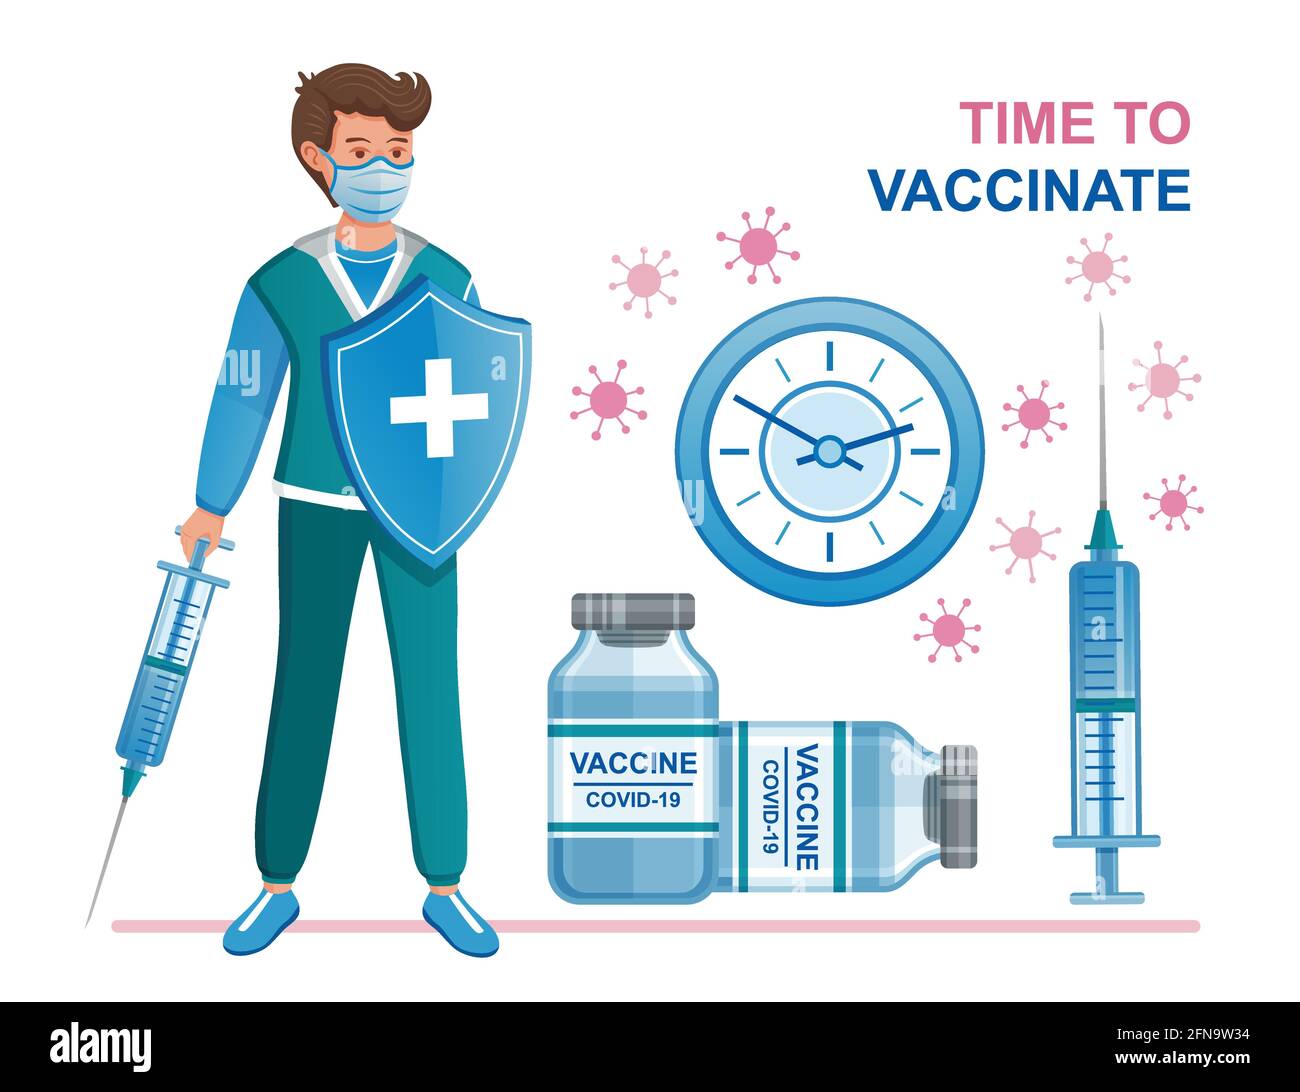 Time coronavirus vaccinate. Covid-19 vaccination. Doctor with syringe injection, shield. Vaccine dose vials. Fight spread virus. Immunization. Vector Stock Vector